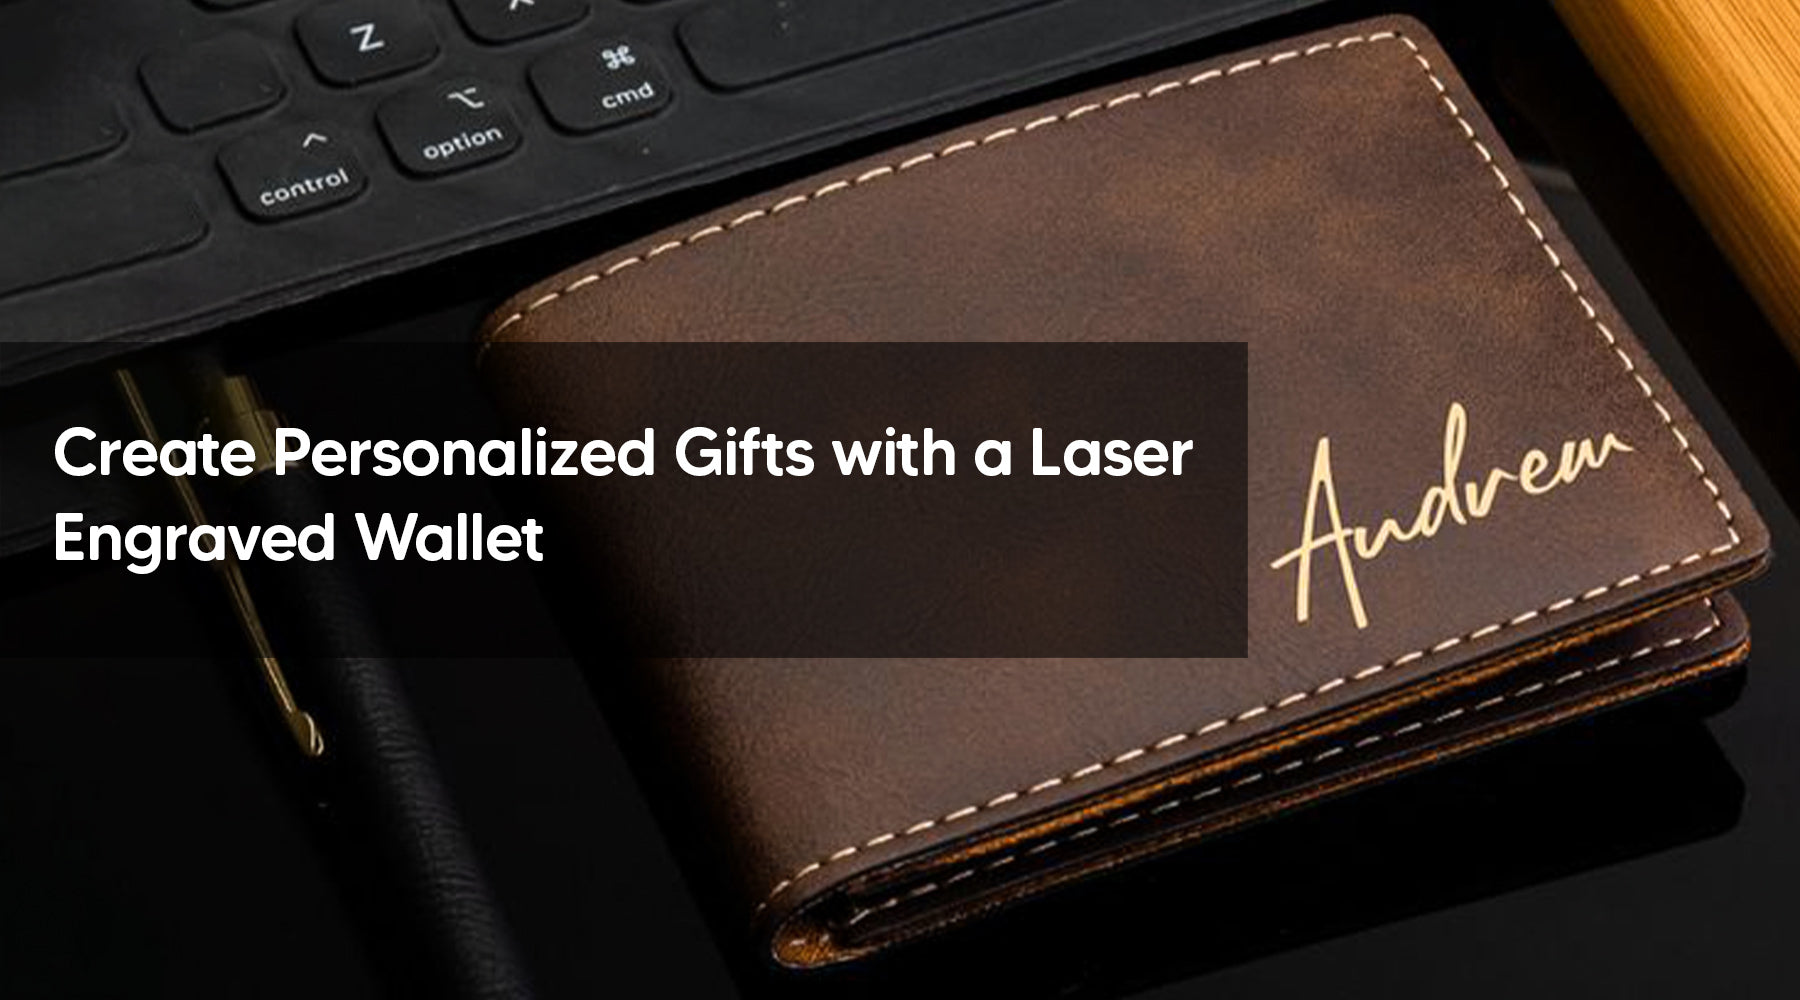 Create Personalized Gifts with a Laser Engraved Wallet